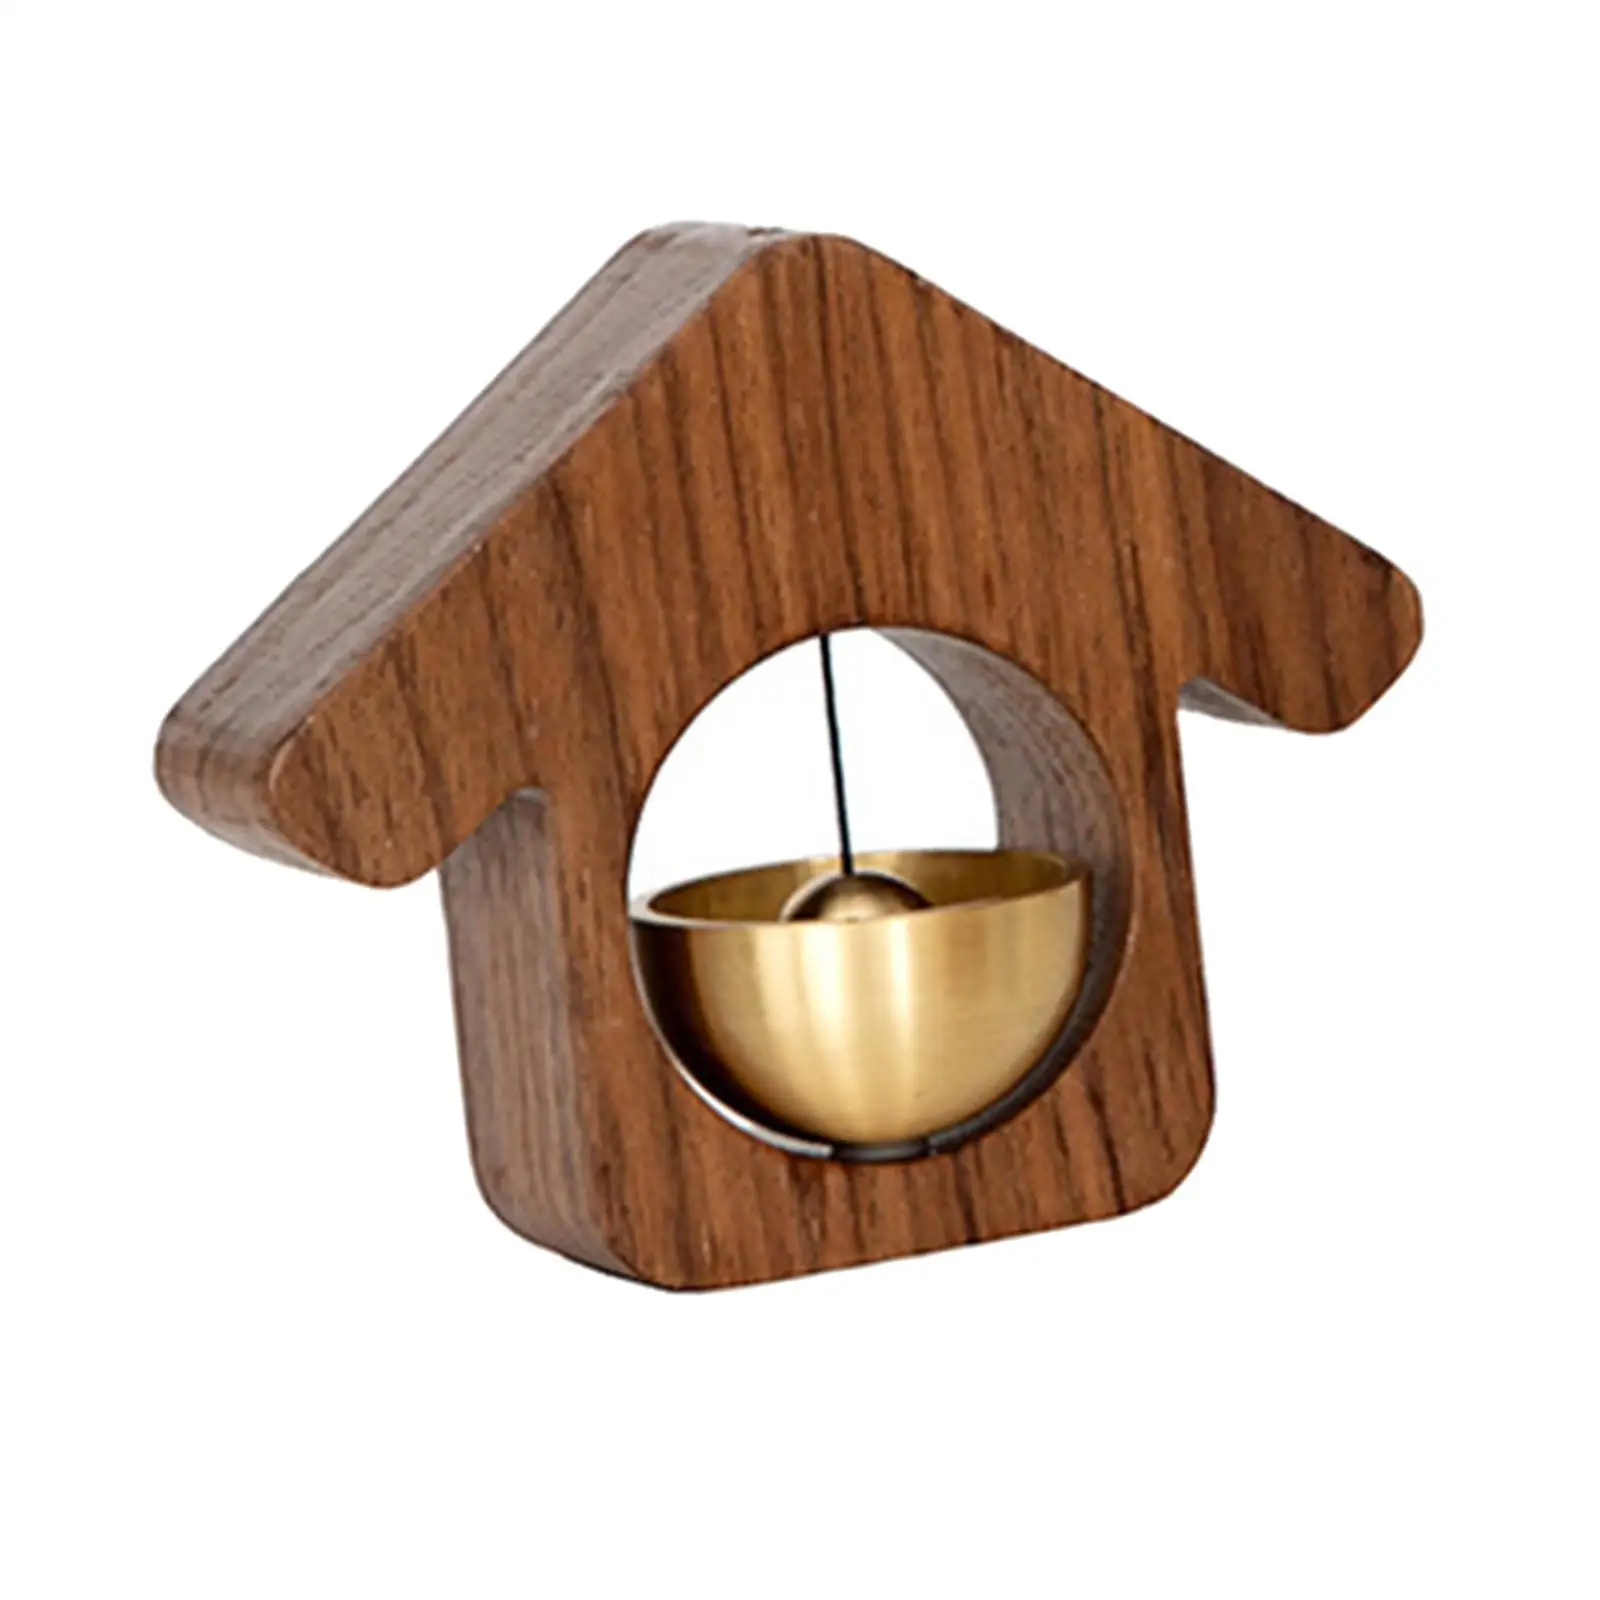 Wood Shopkeepers Bell Decorative for Farmhouse Wardrobe Housewarming Gifts